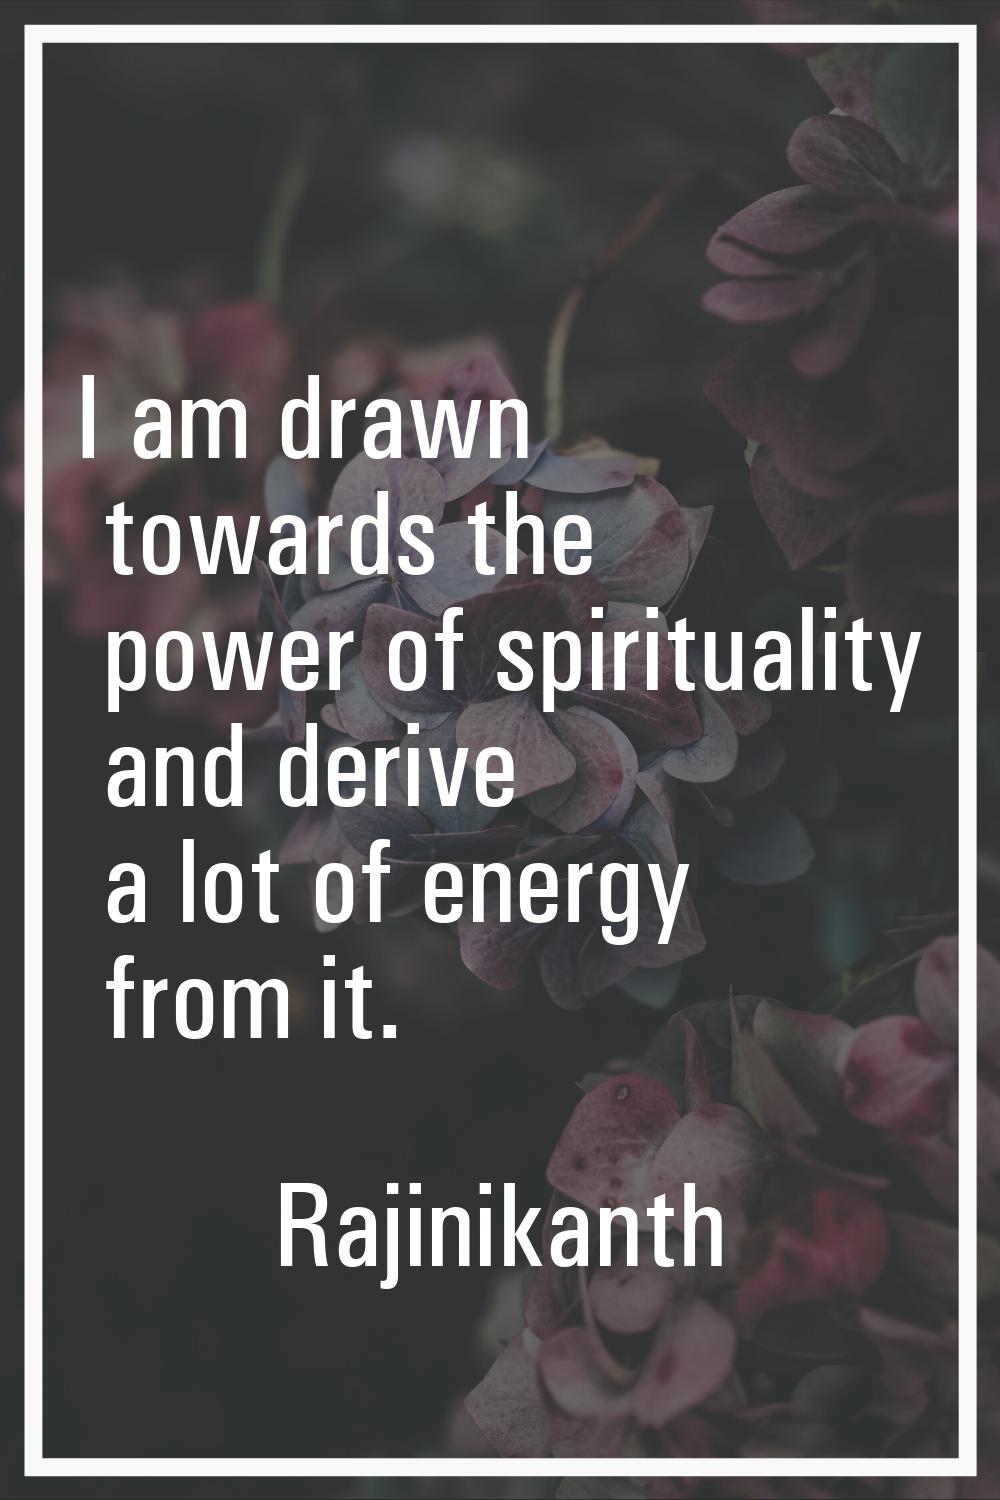 I am drawn towards the power of spirituality and derive a lot of energy from it.